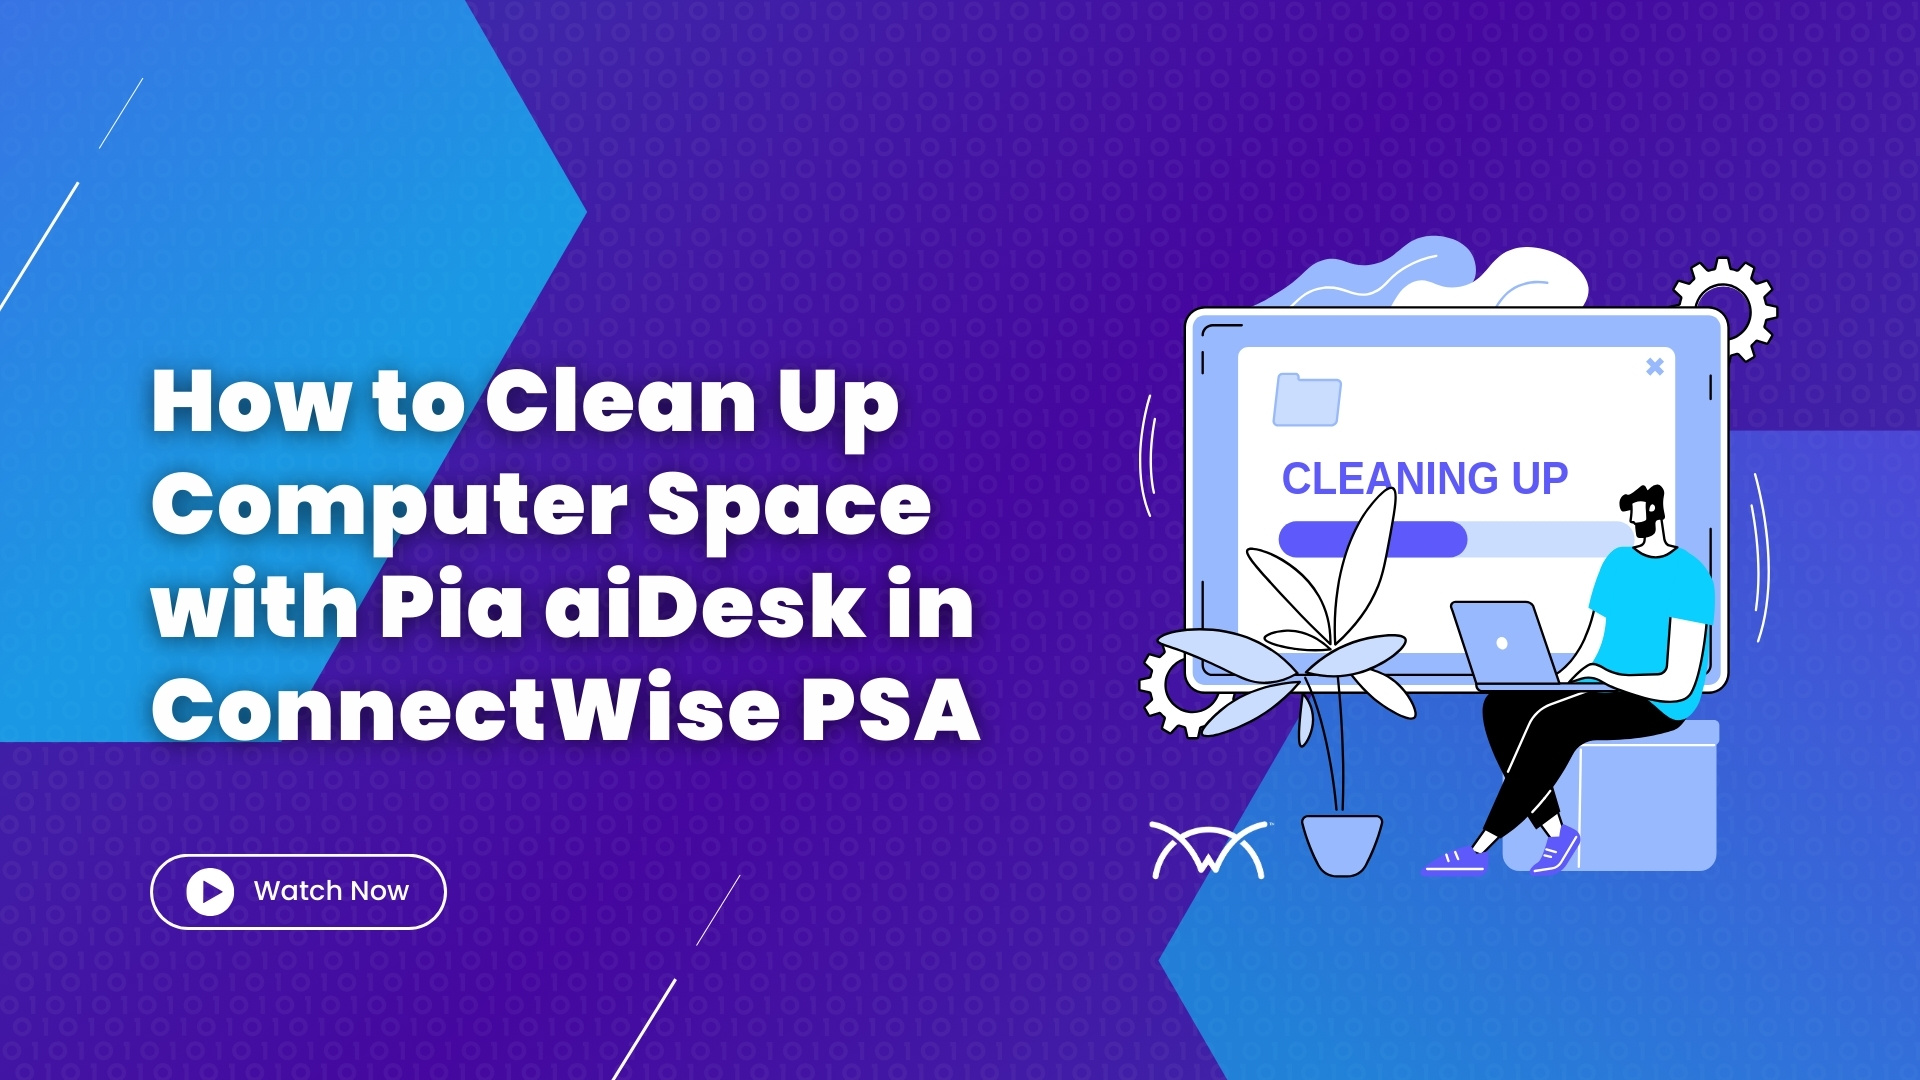 How to Clean Up Computer Space with Pia aiDesk in ConnectWise PSA